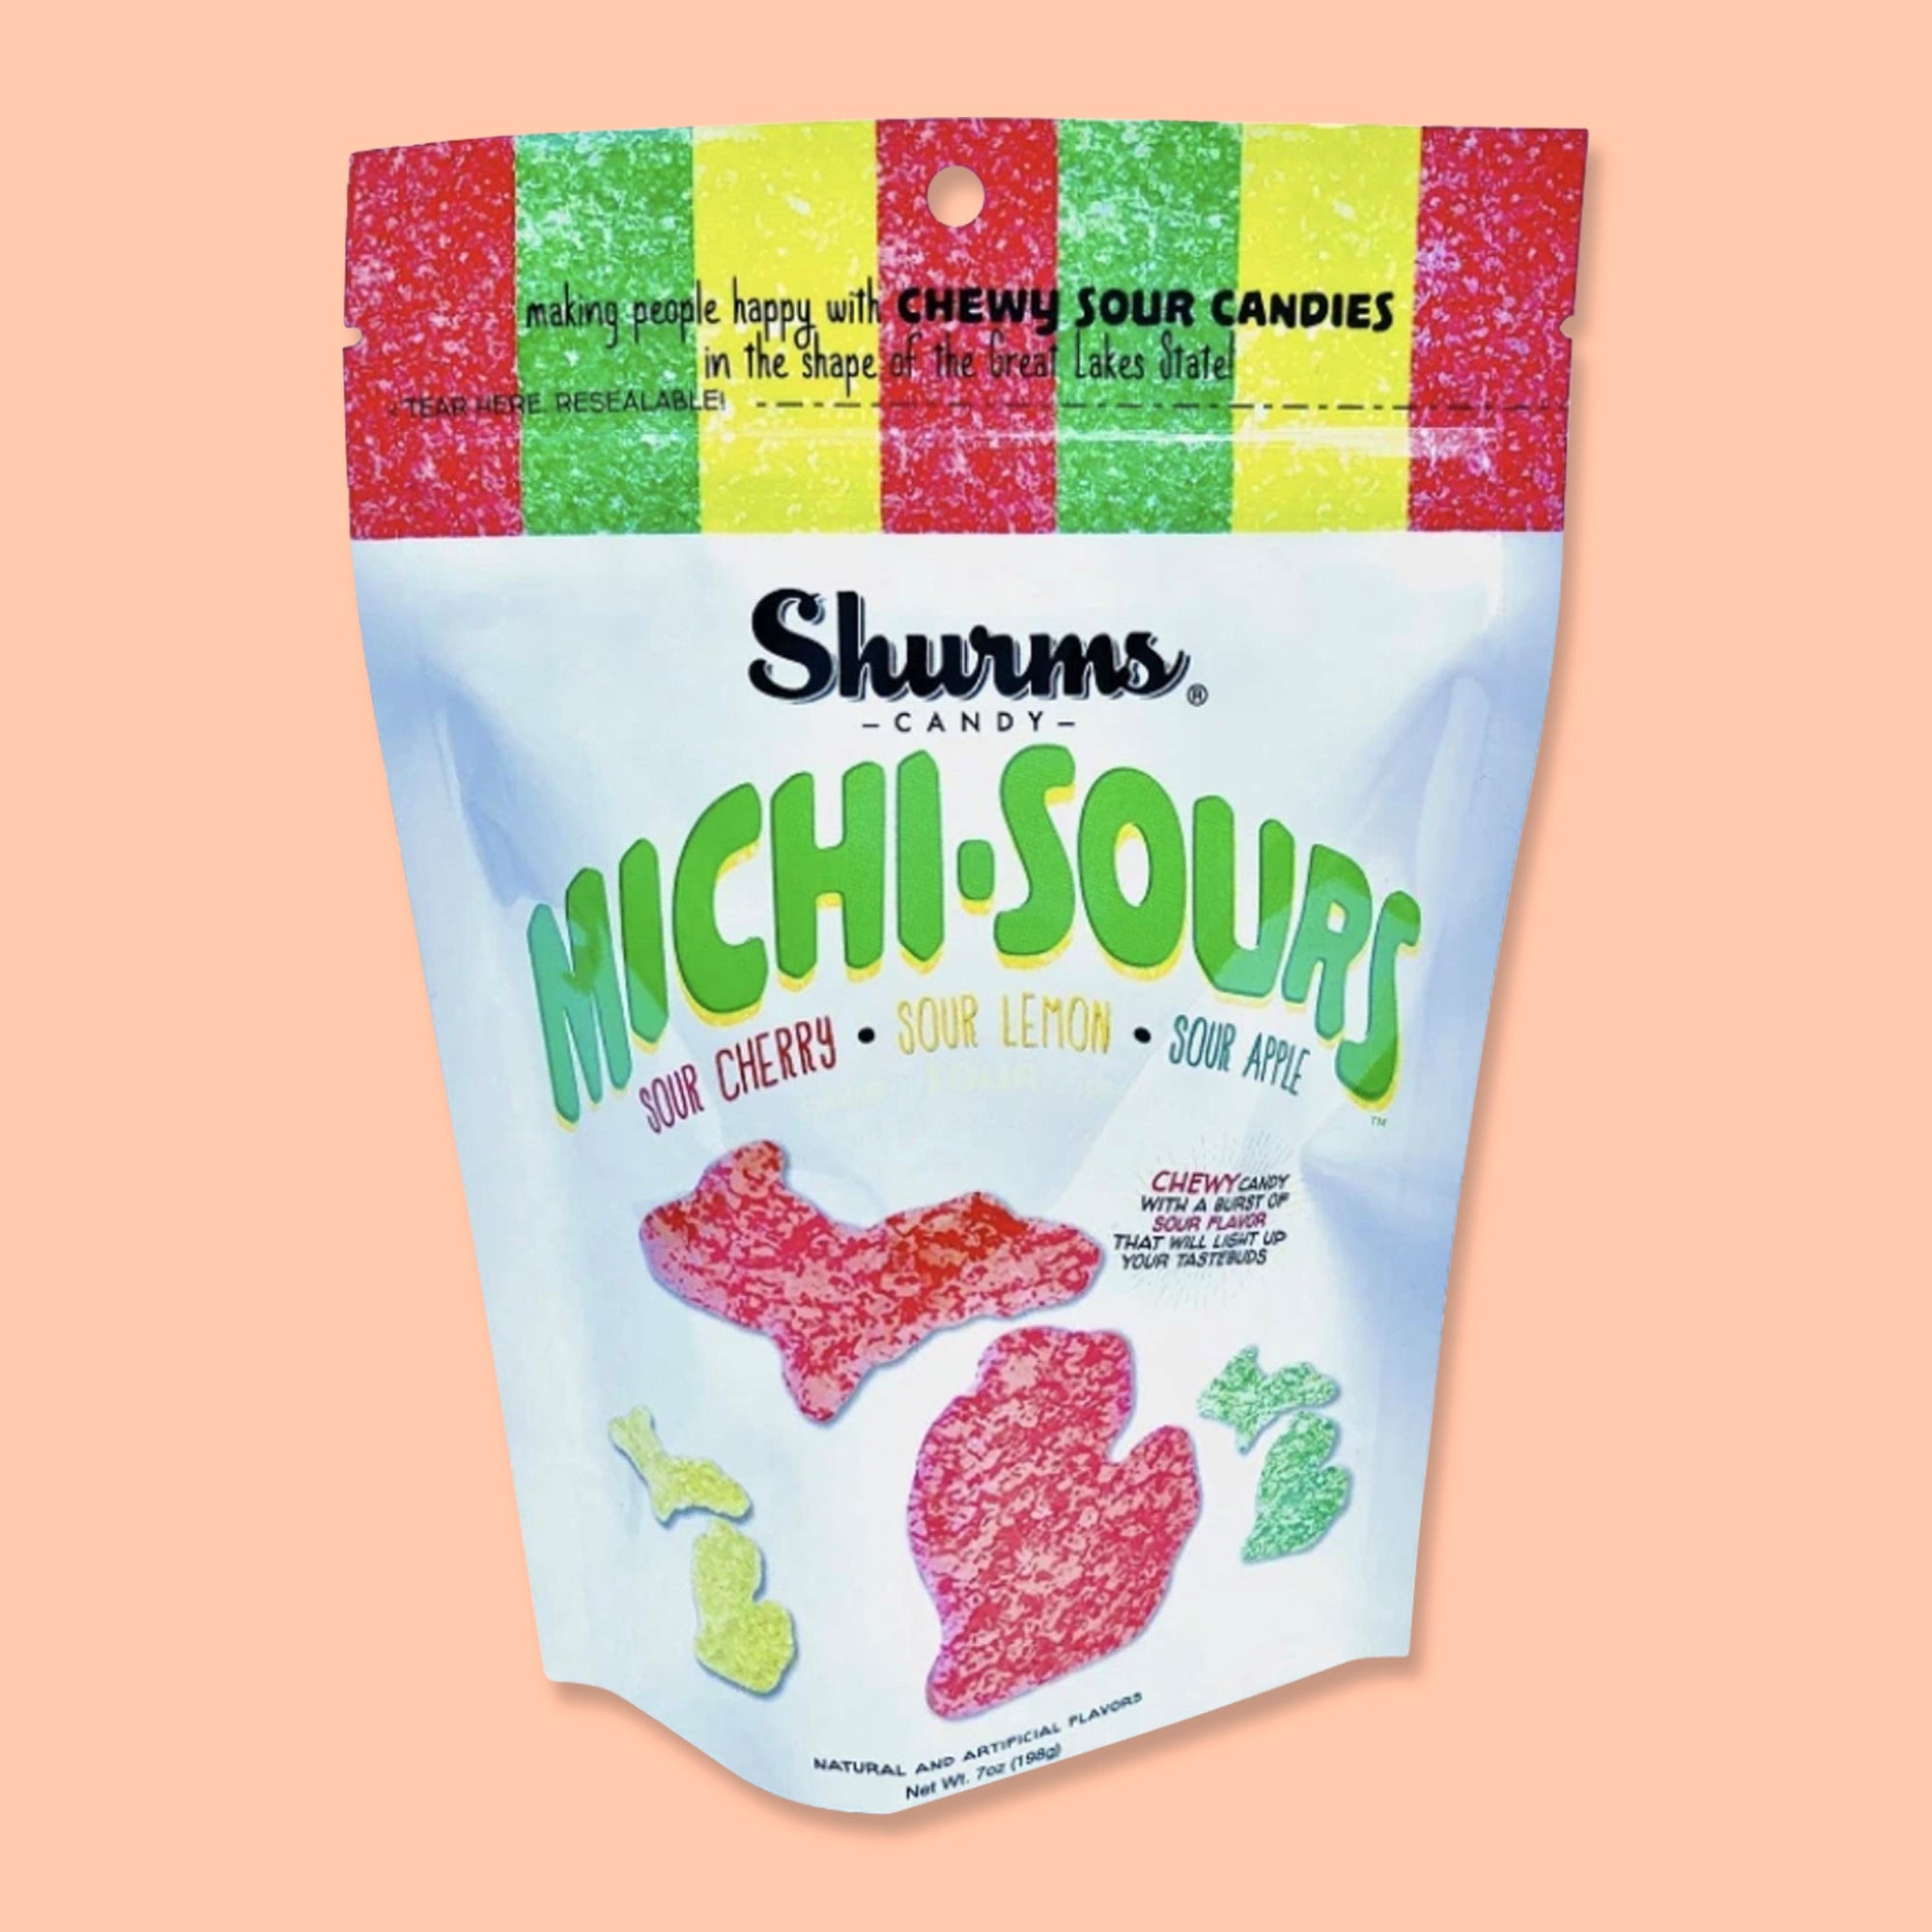 Michisours Candy